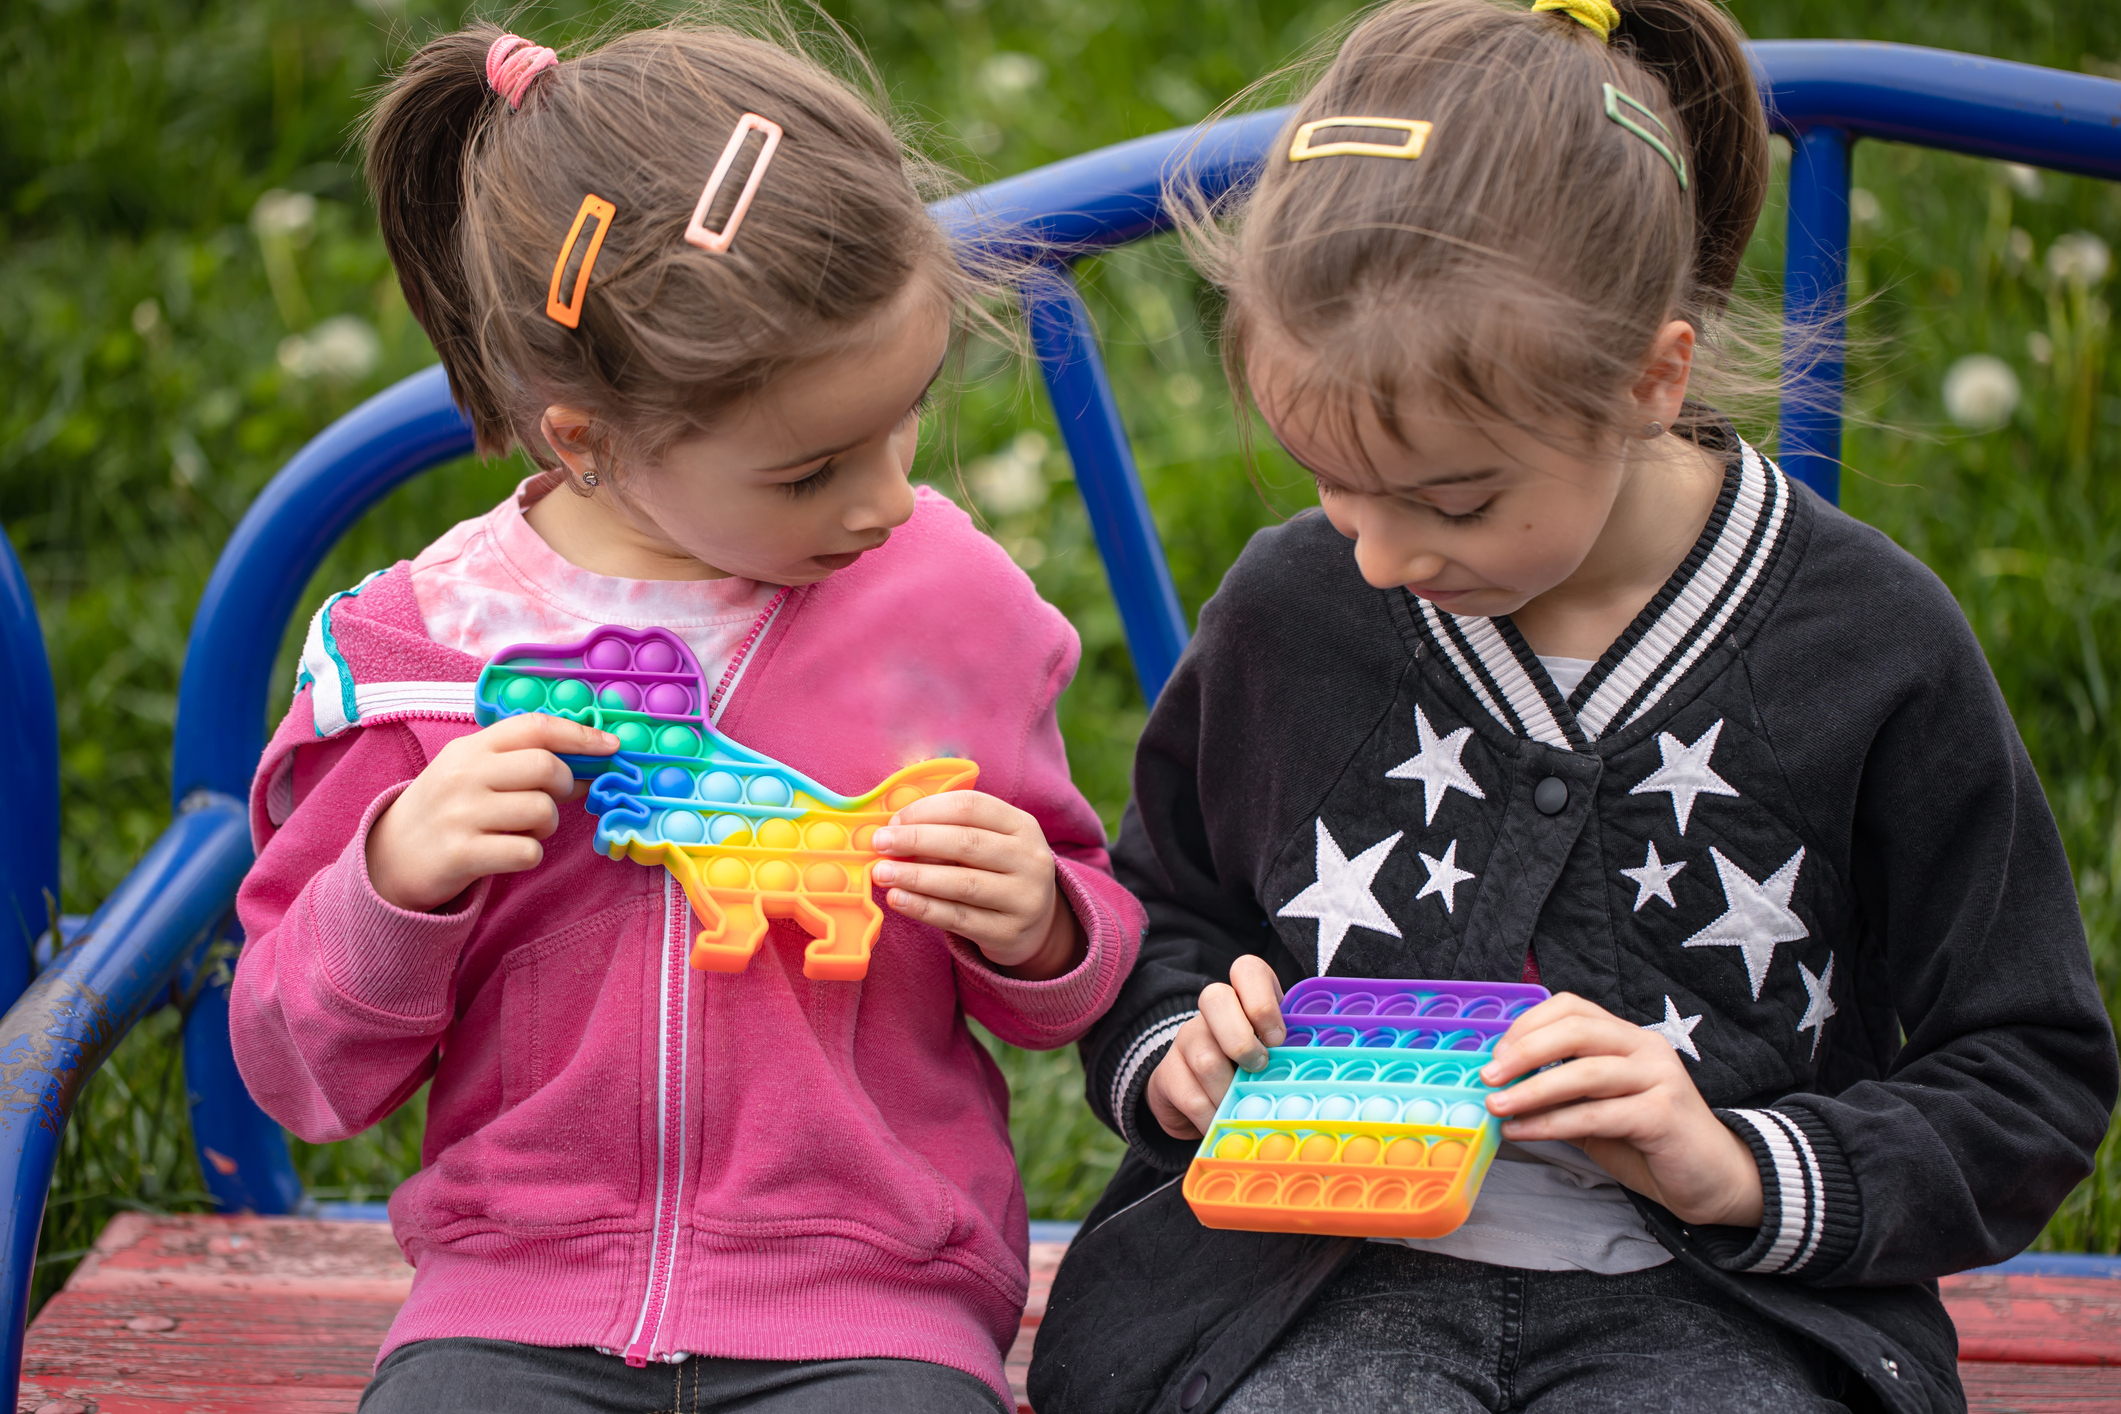 Two little girls with pale skin and colorful barettes in their light brown hair sit on a park bench playing with rainbow-colored popping fidget toys